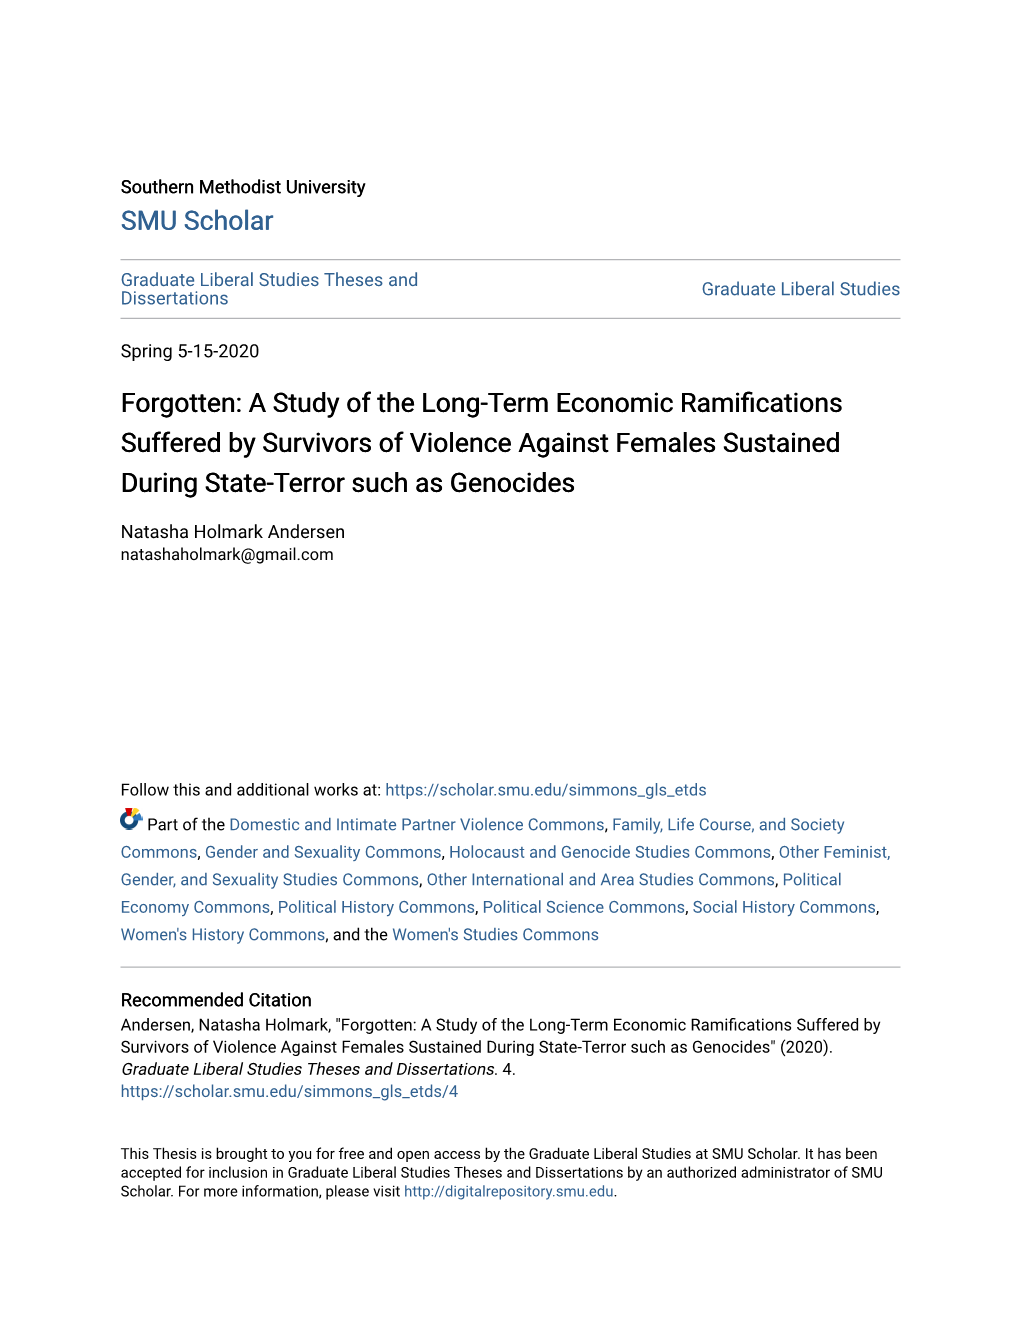 A Study of the Long-Term Economic Ramifications Suffered by Survivors of Violence Against Females Sustained During State-Terror Such As Genocides